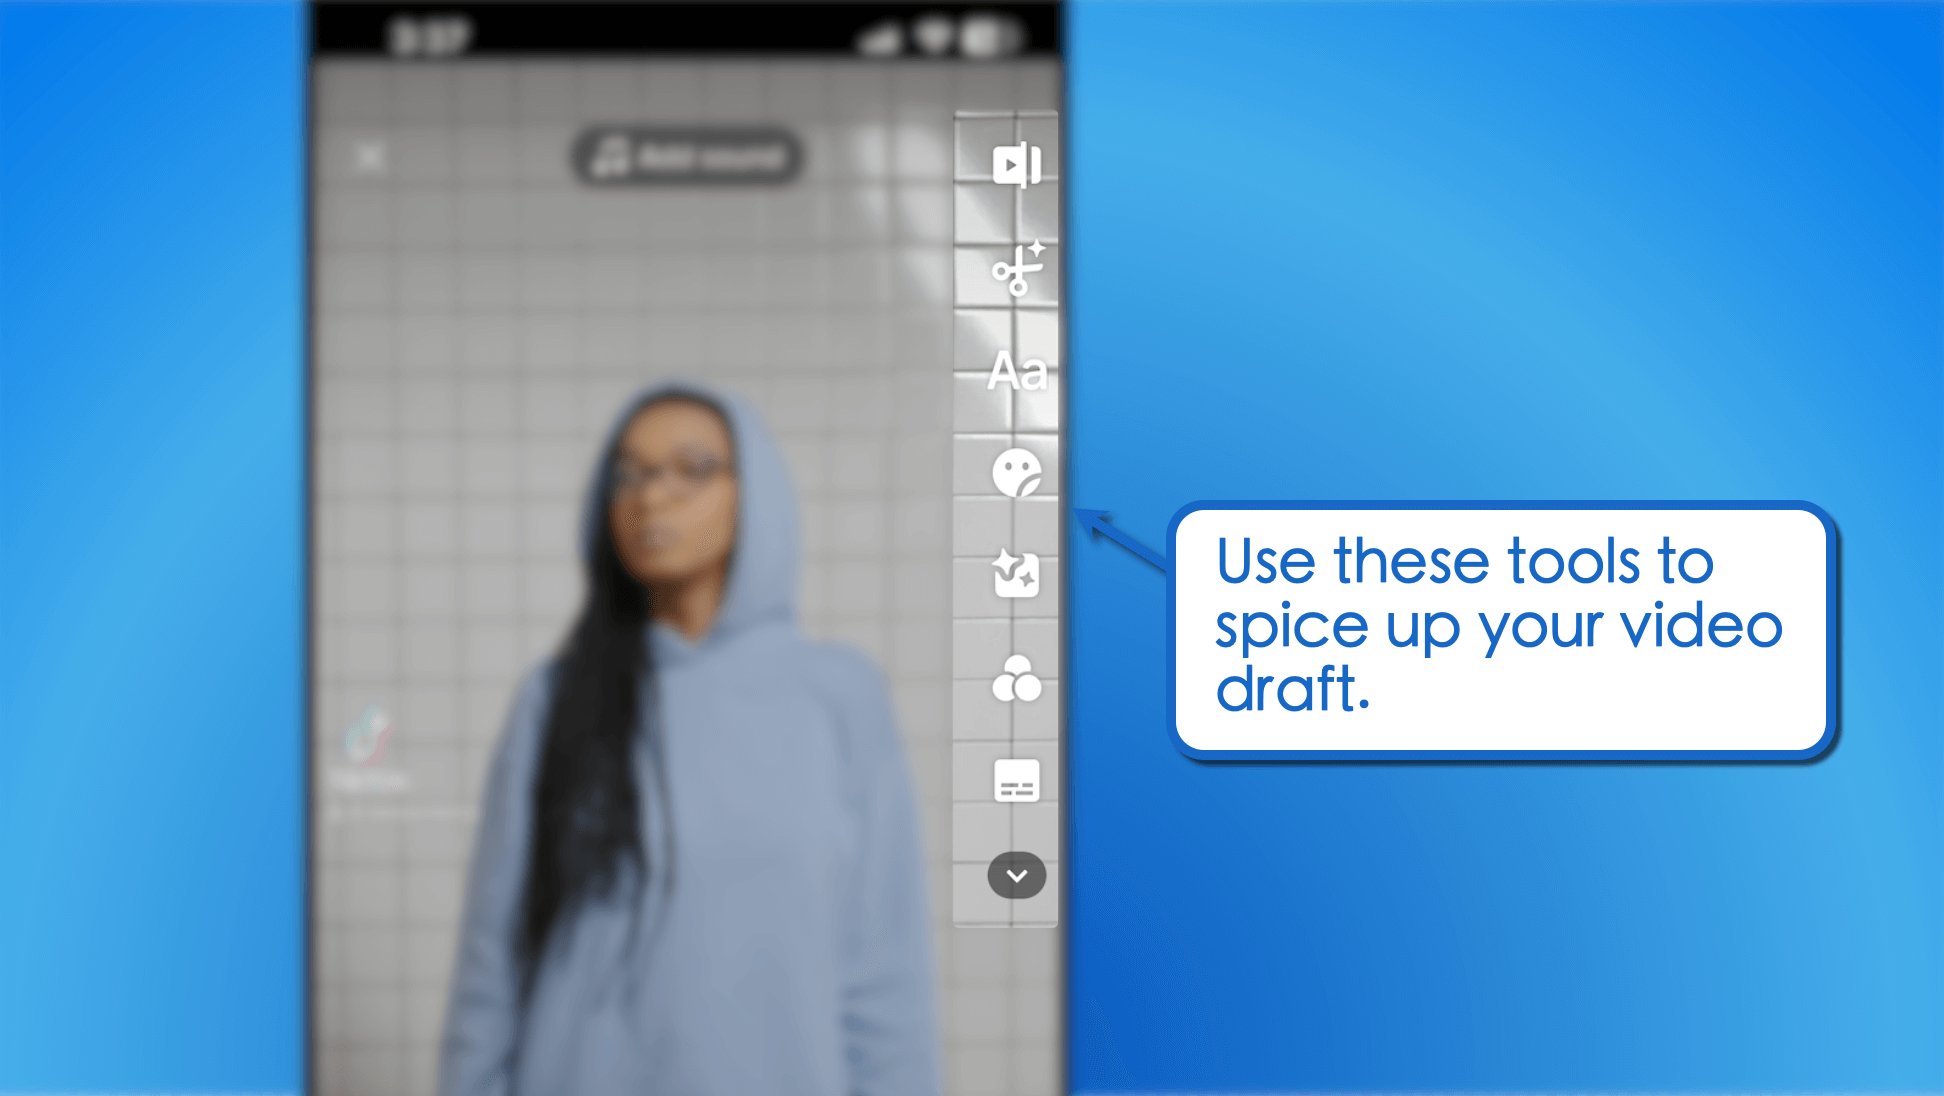 Use tools to spice up drafts.